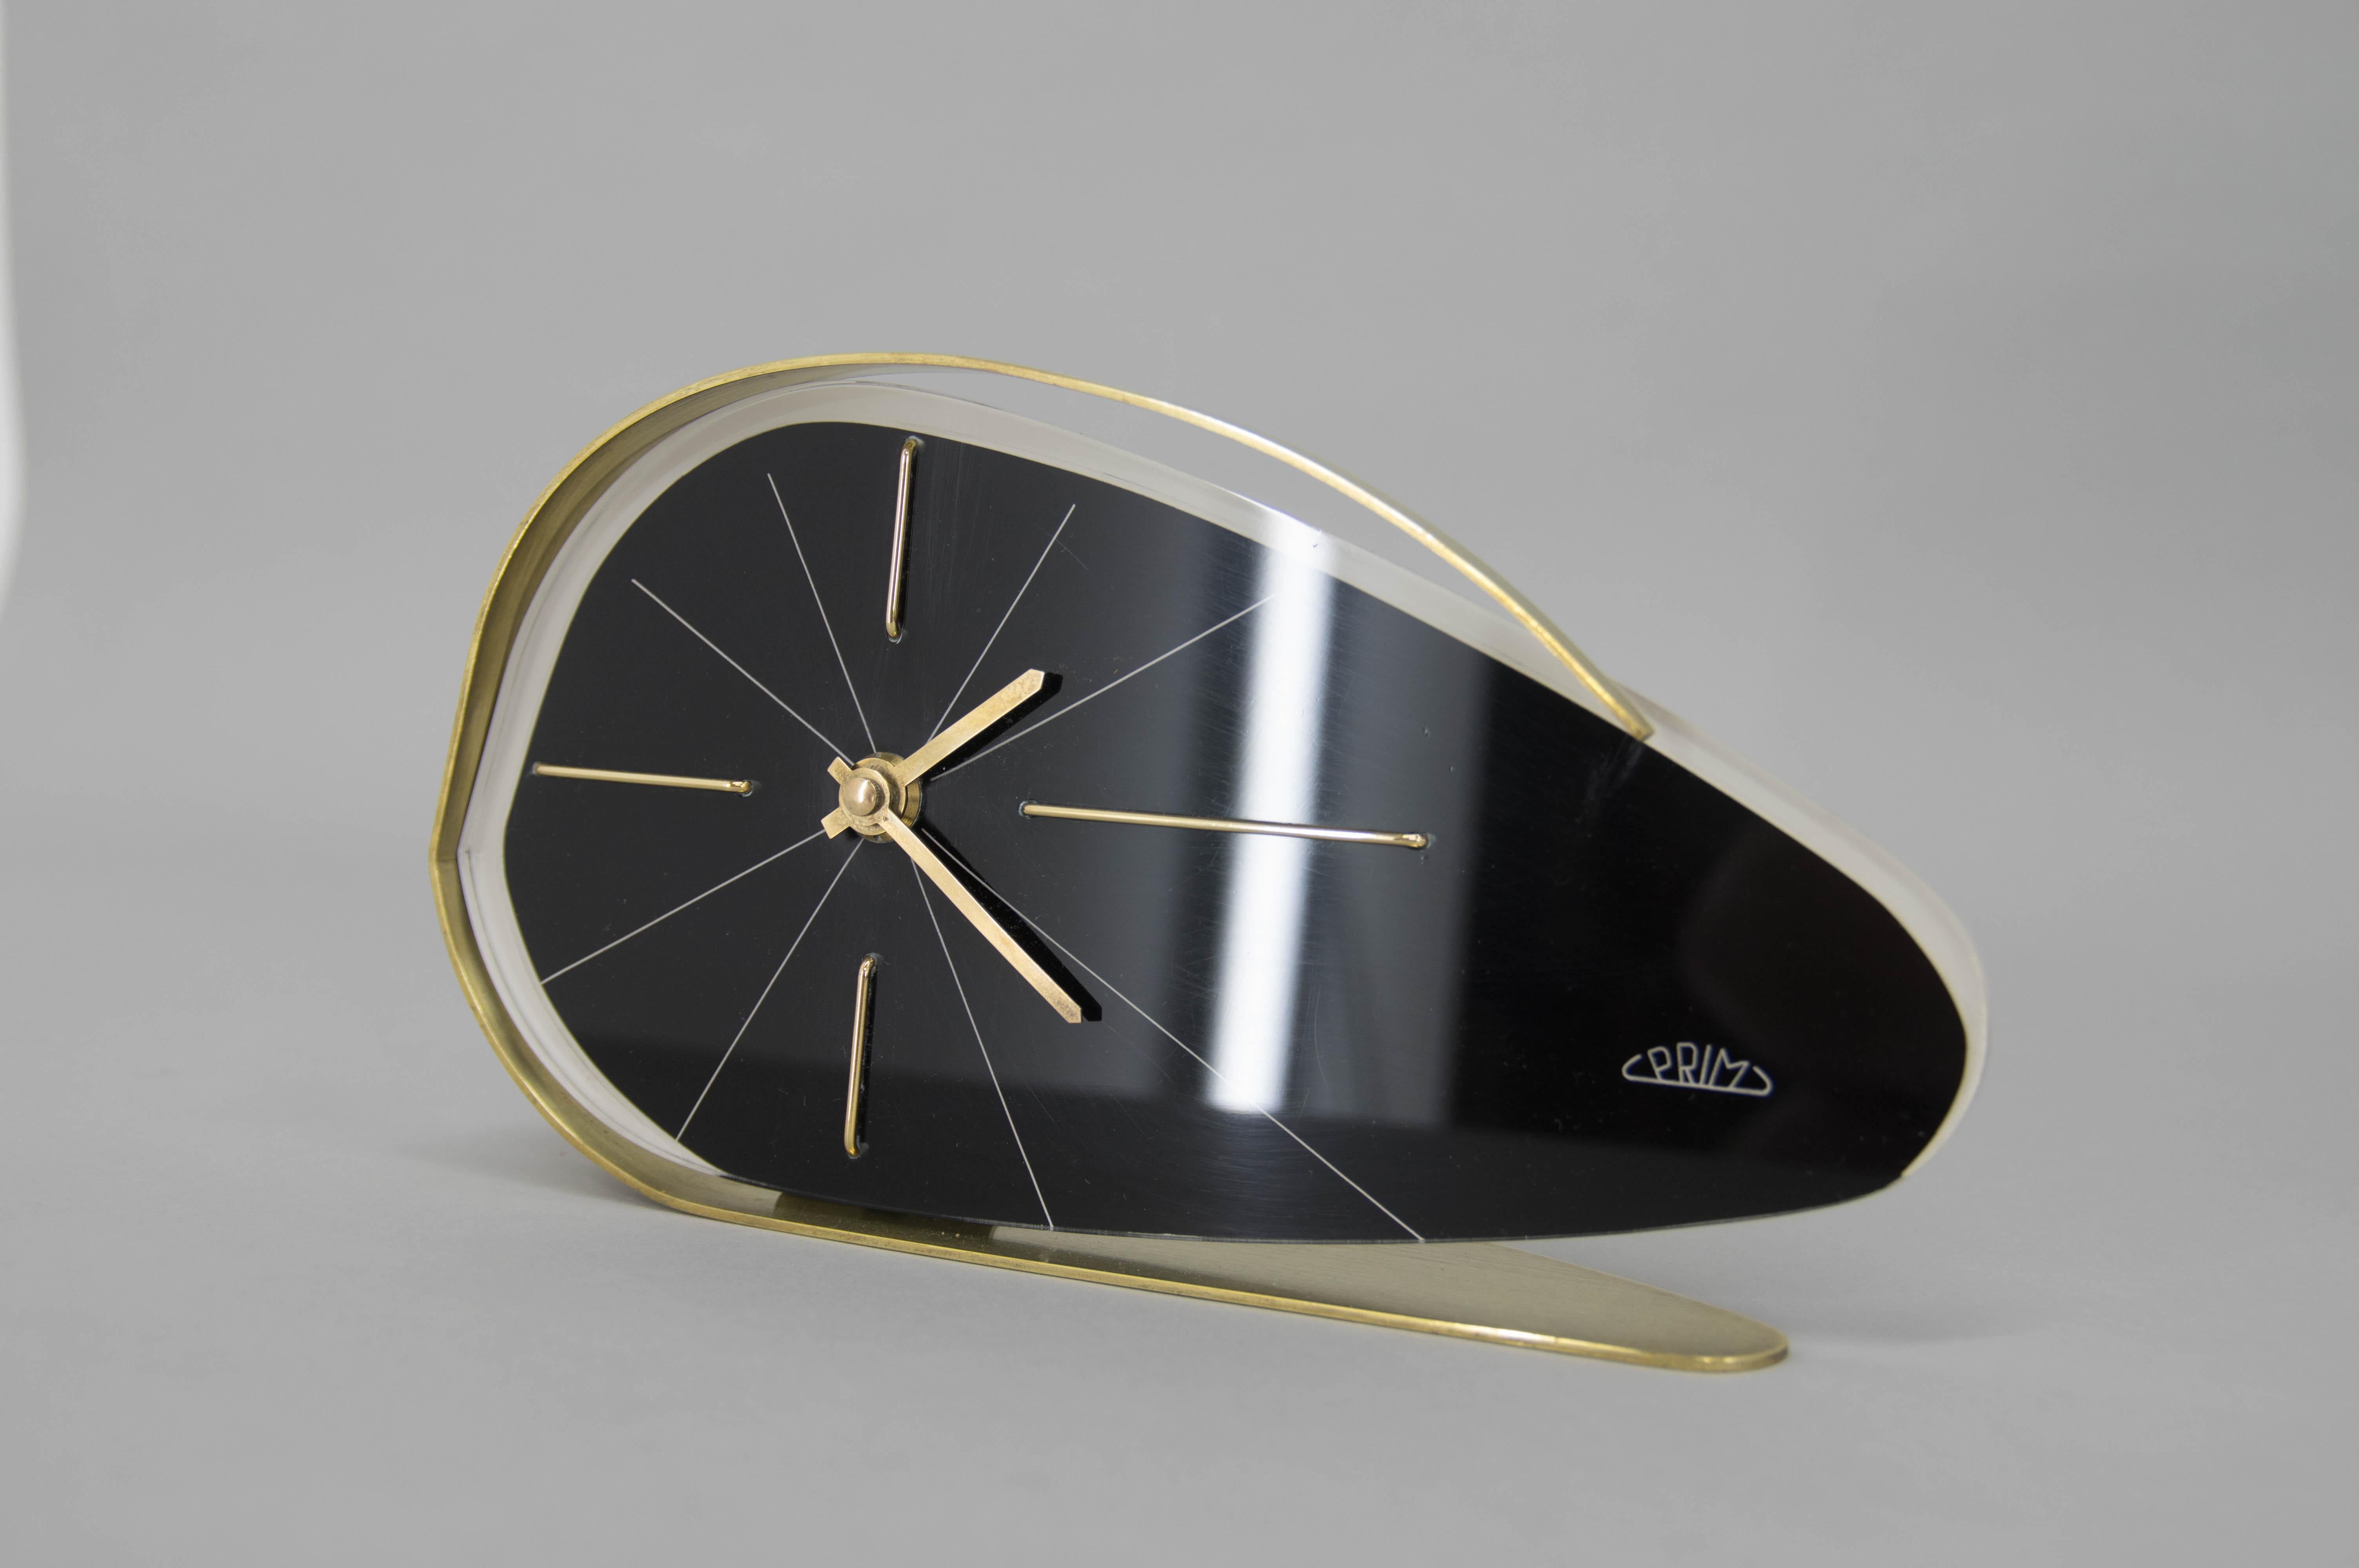 Table clock in Brussels style made in Czechoslovakia by Chronotechna Sternberk in 1960
Brass and black glass.
Very good condition,.
This piece has been serviced and it keeps time very well.